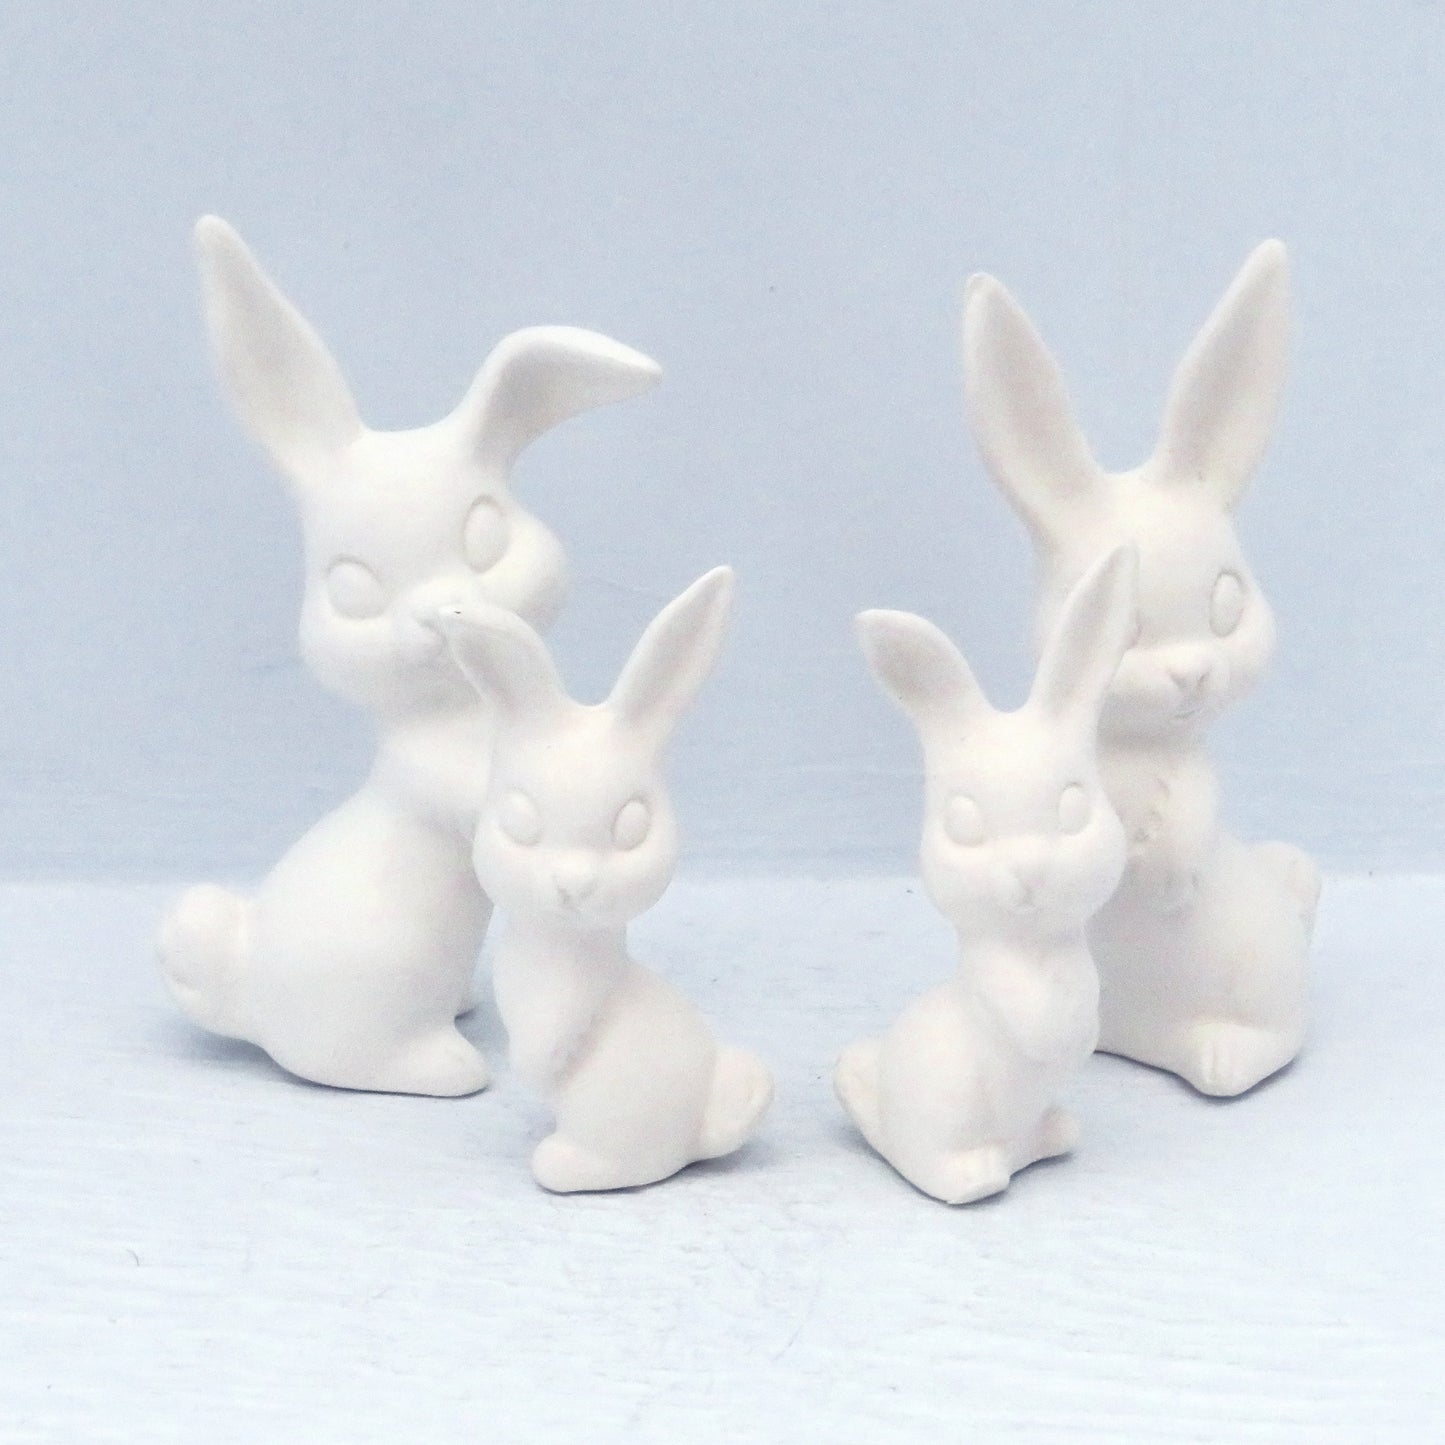 Handmade Set of 4 Ready to Paint Ceramic Bunny Figurines for Bunny Lover Gift